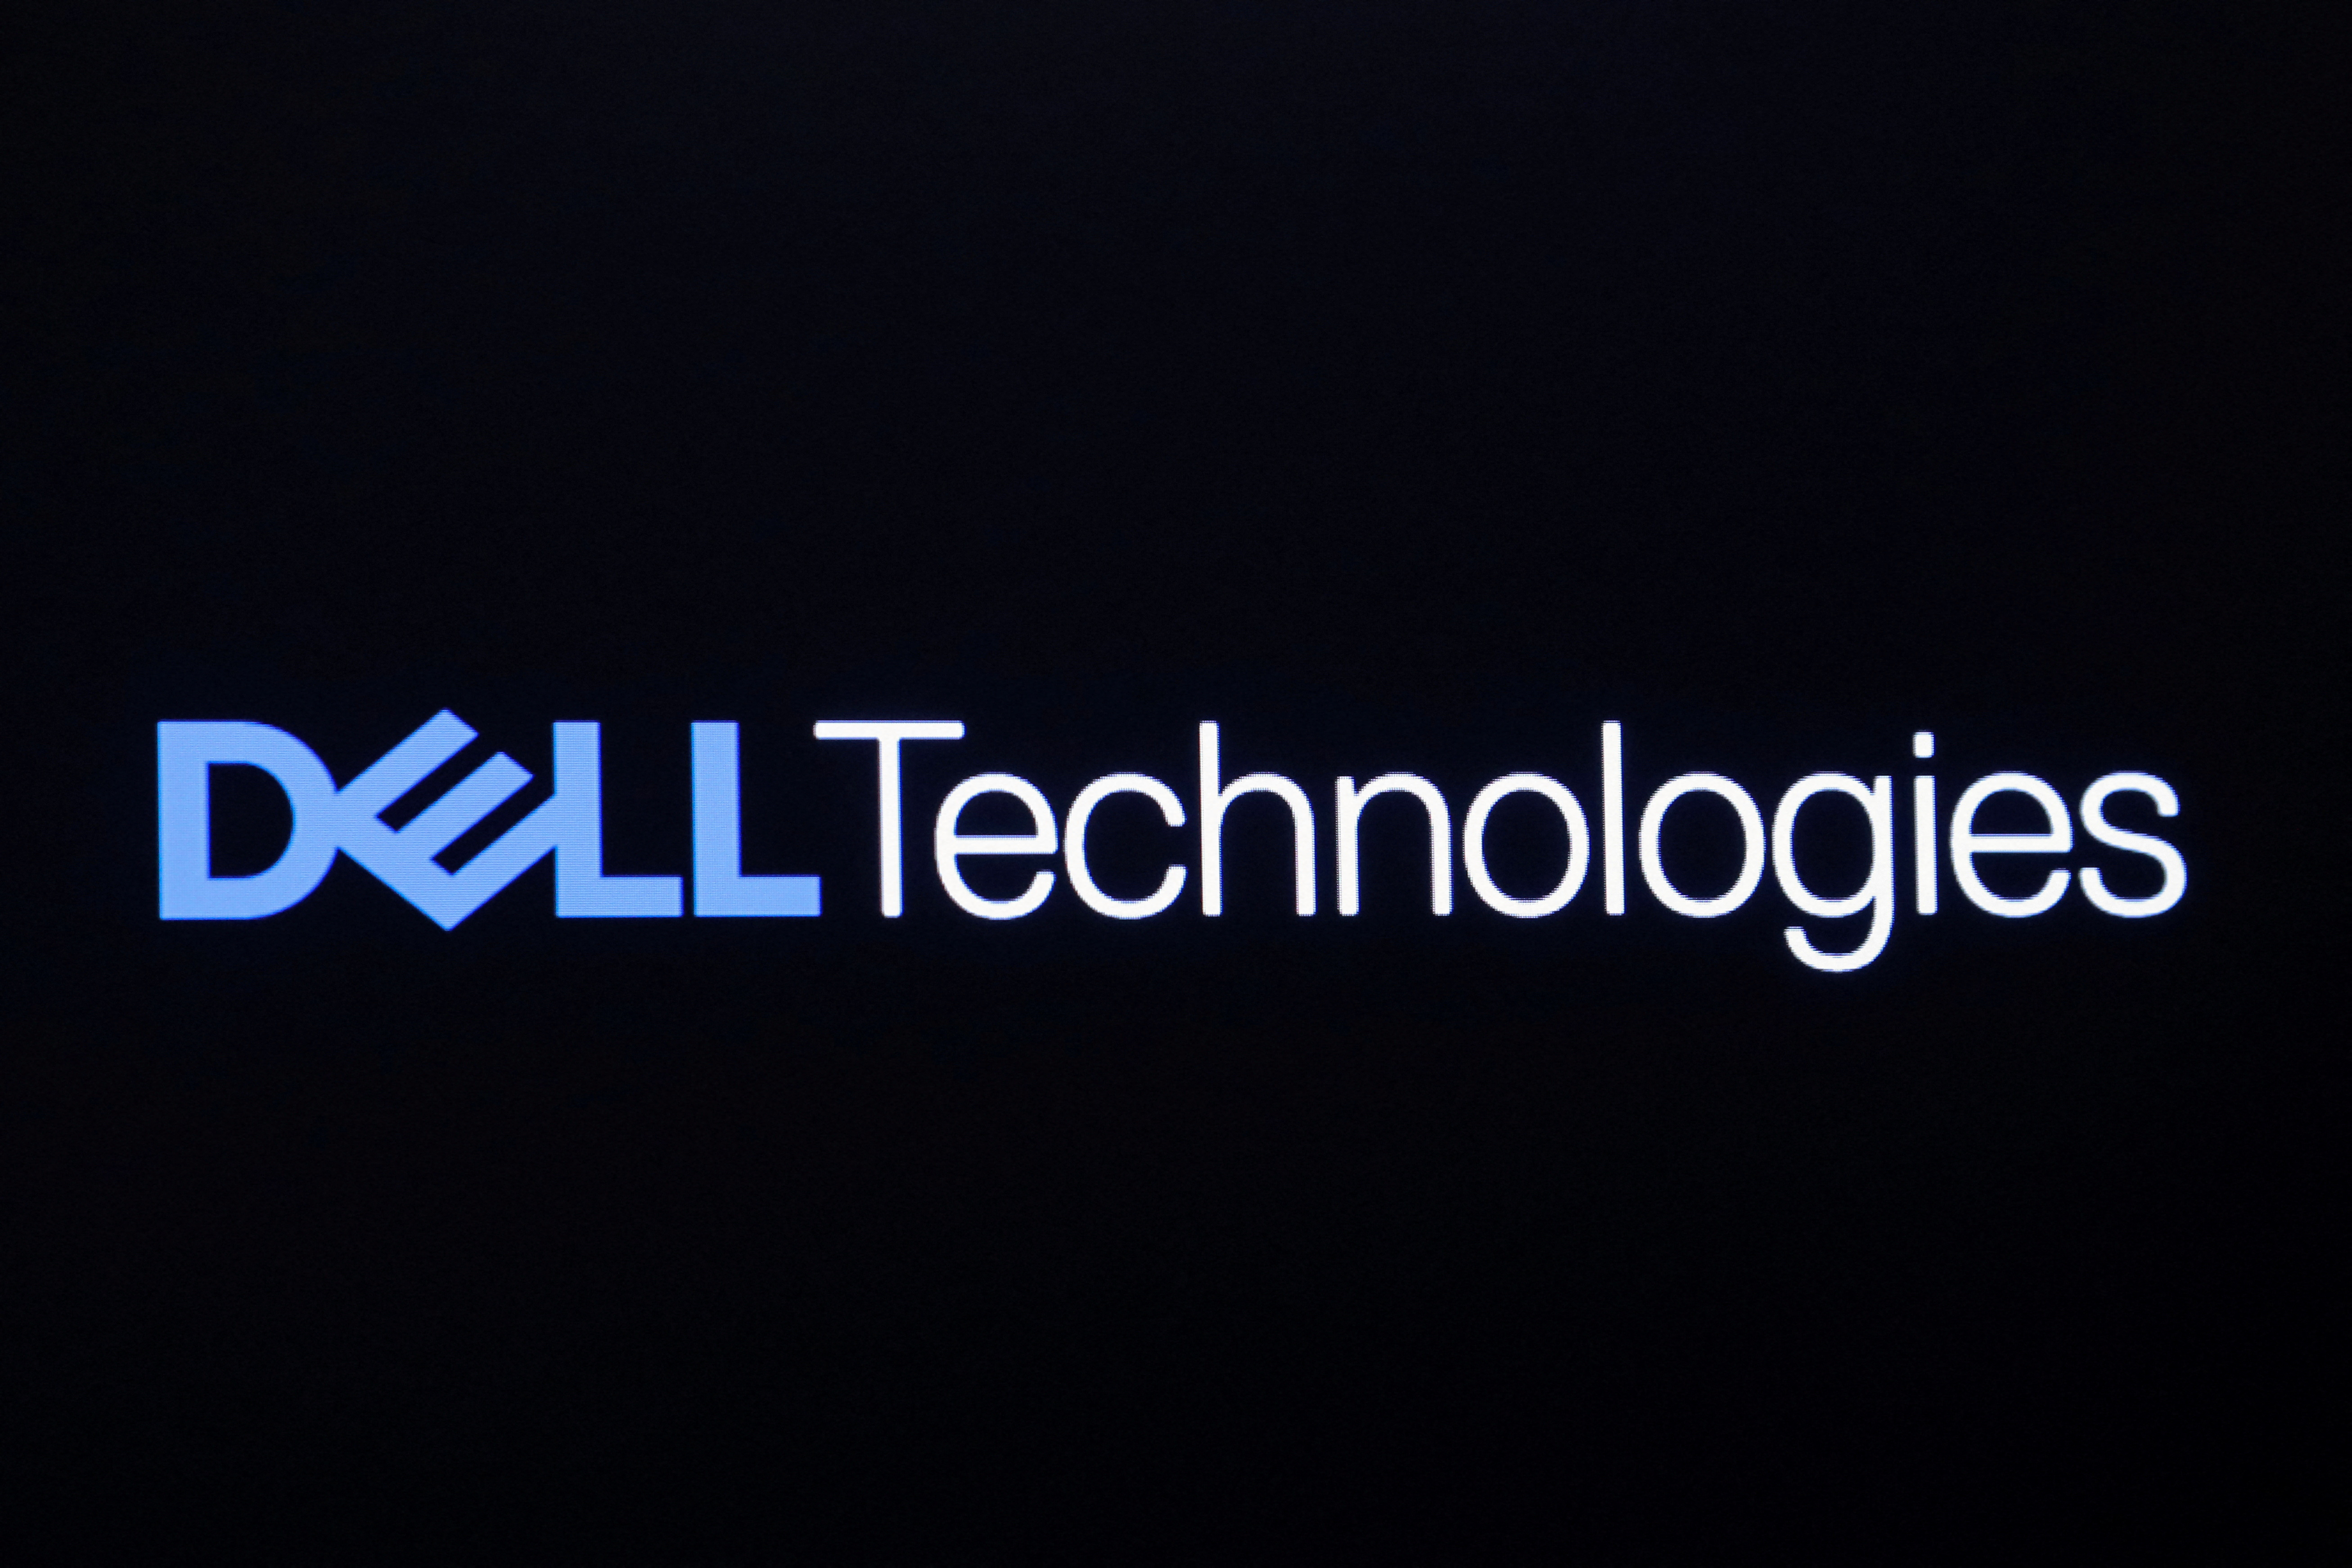 The logo for Dell Technologies Inc. is displayed on a screen on the floor of the New York Stock Exchange in New York